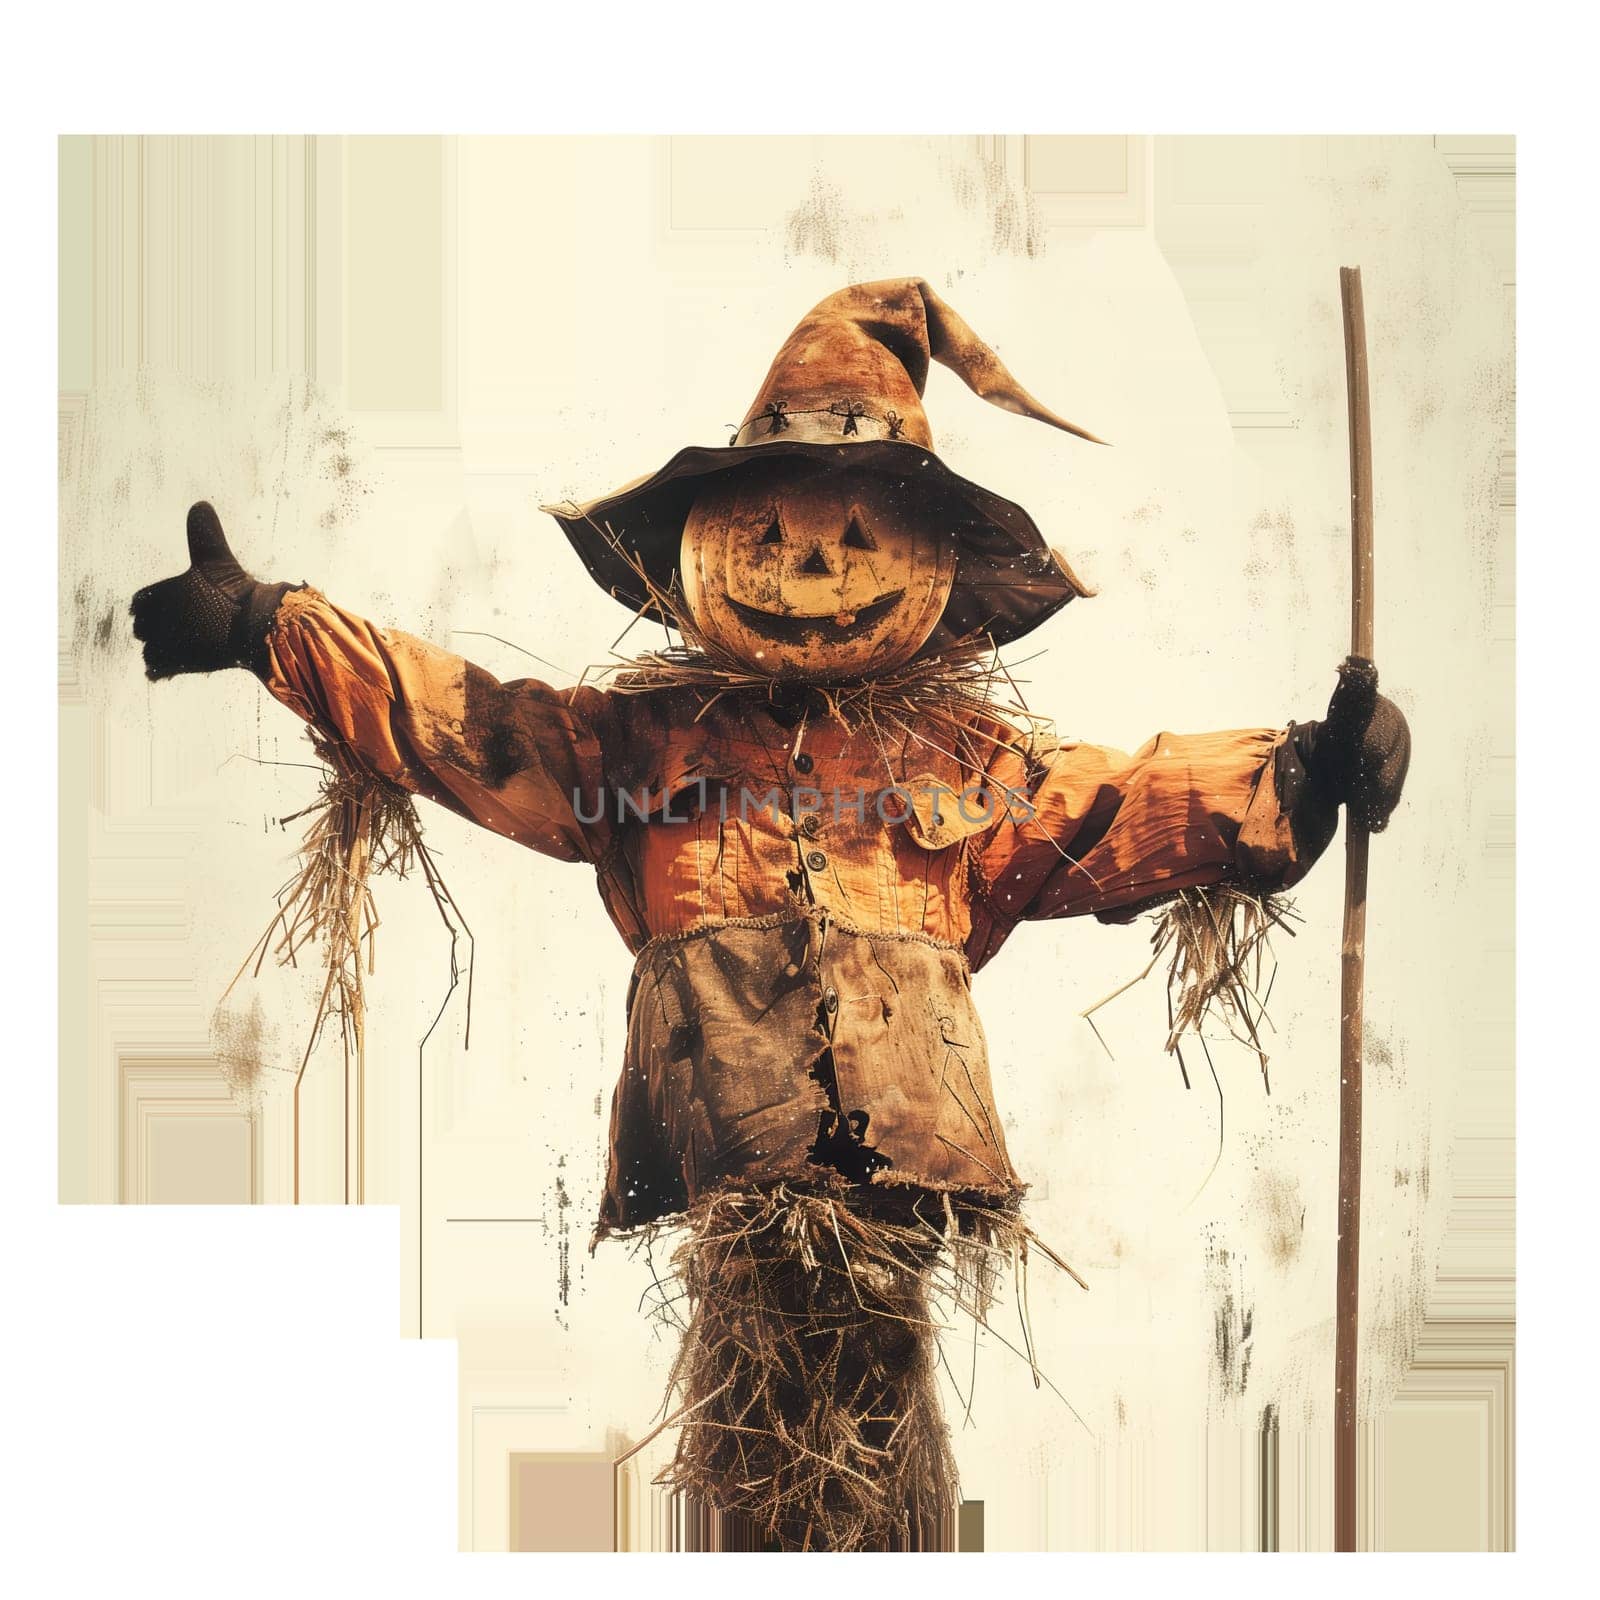 Cut out faded photo of halloween scarecrow by Dustick